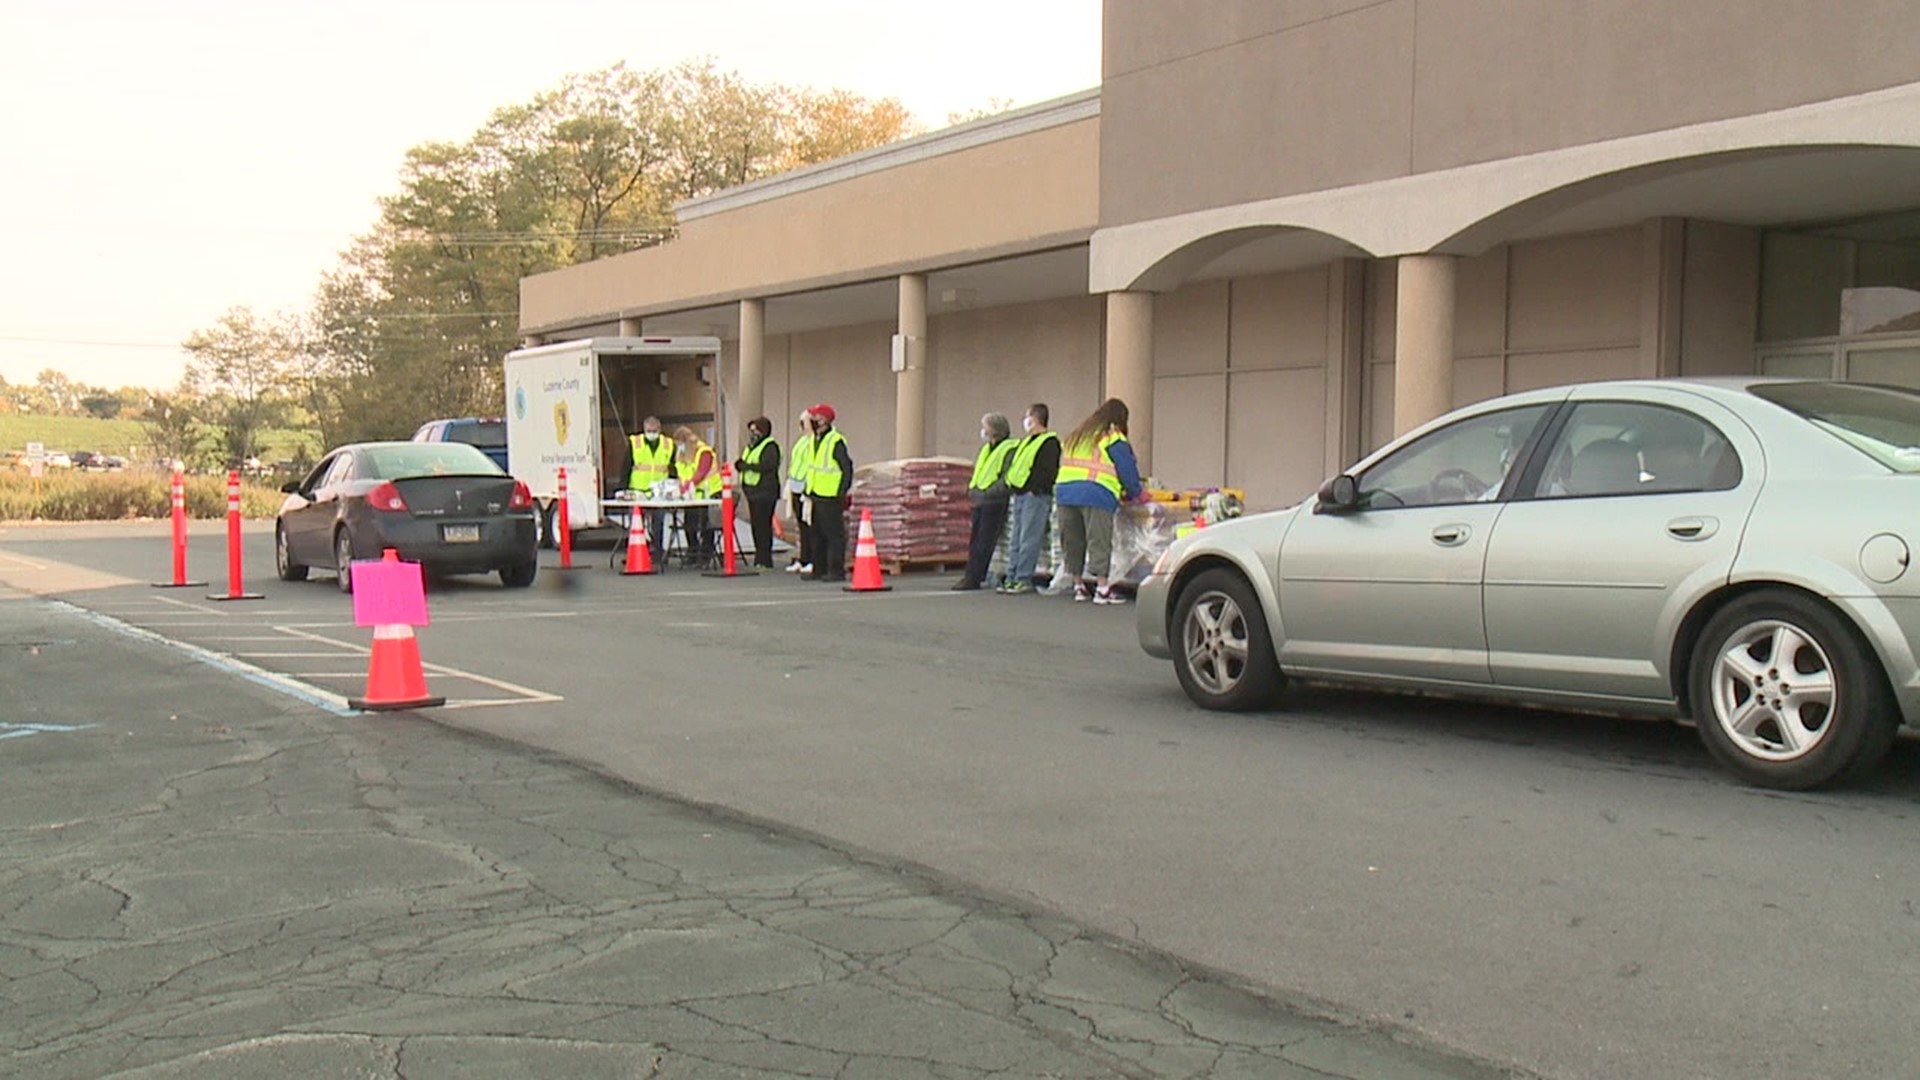 The Luzerne County Animal Response Team hosted the drive-thru food distribution at the Midway Shopping Center.